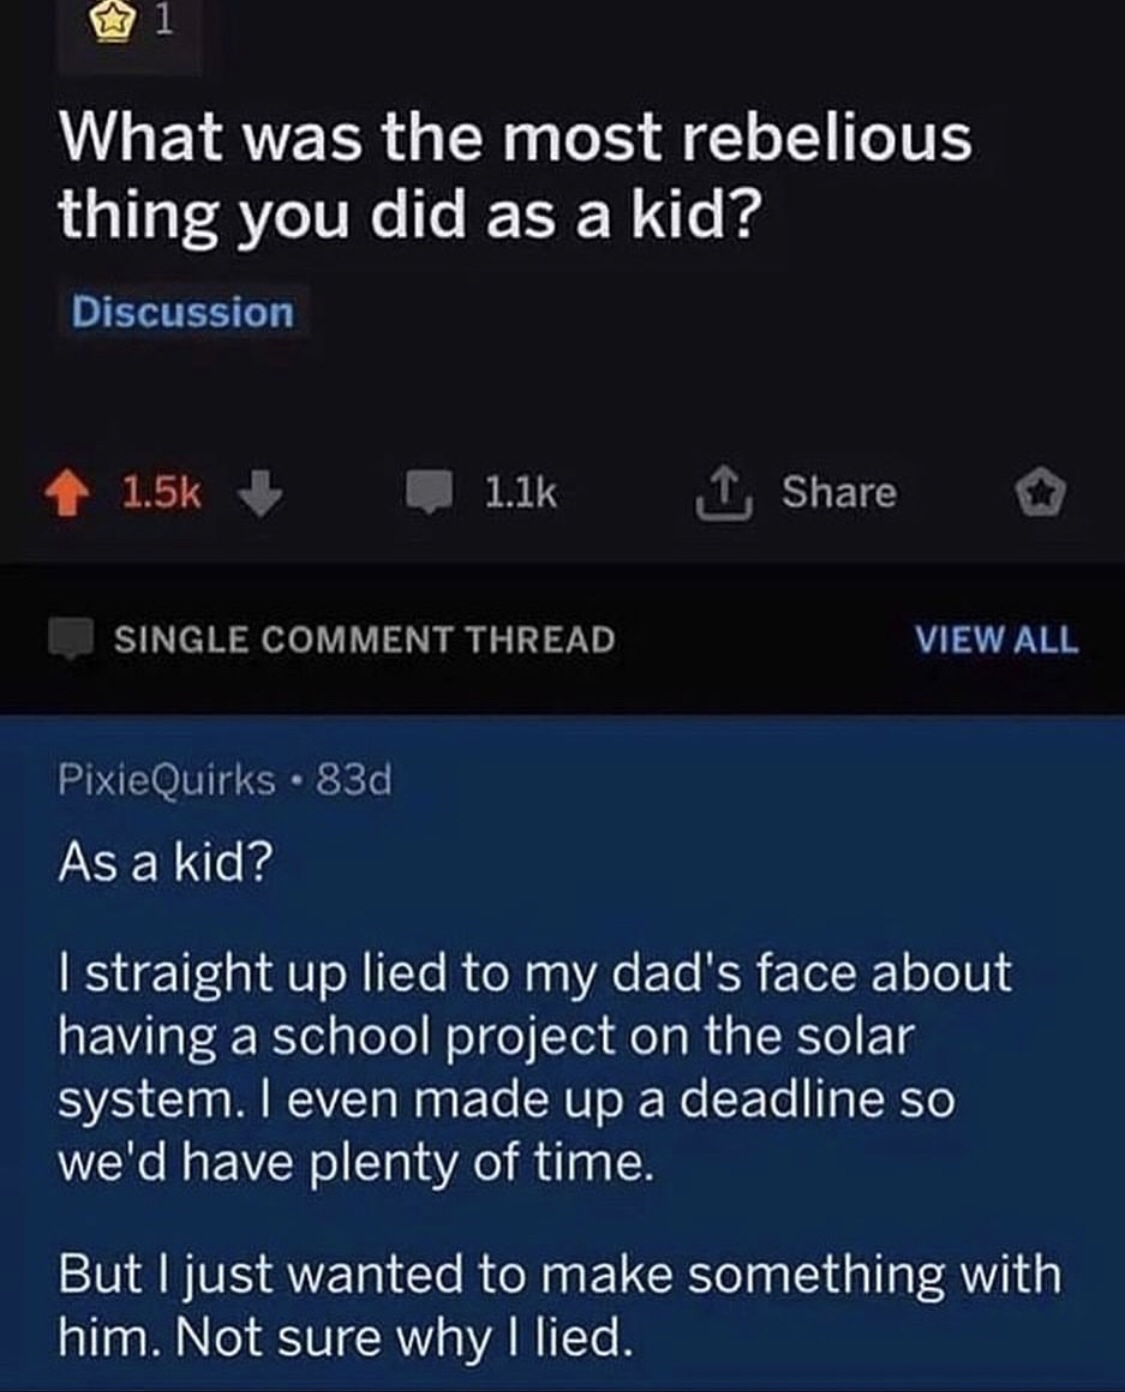 screenshot - What was the most rebelious thing you did as a kid? Discussion 1 1 Single Comment Thread View All PixieQuirks . 83d As a kid? I straight up lied to my dad's face about having a school project on the solar system. I even made up a deadline so 